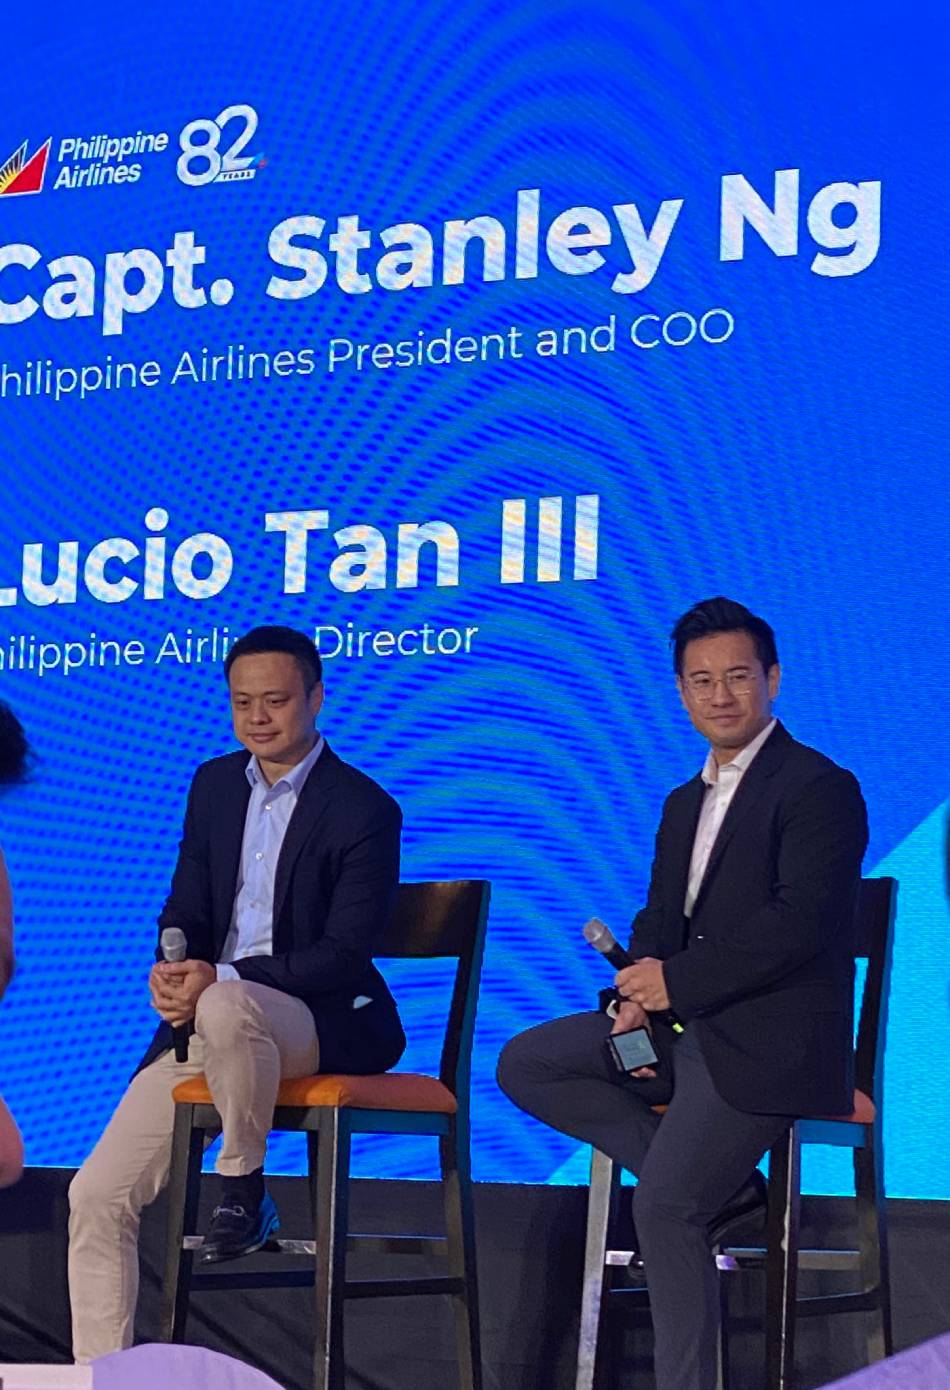 PAL President and COO Capt. Stanley Ng and PAL Director Lucio Tan III